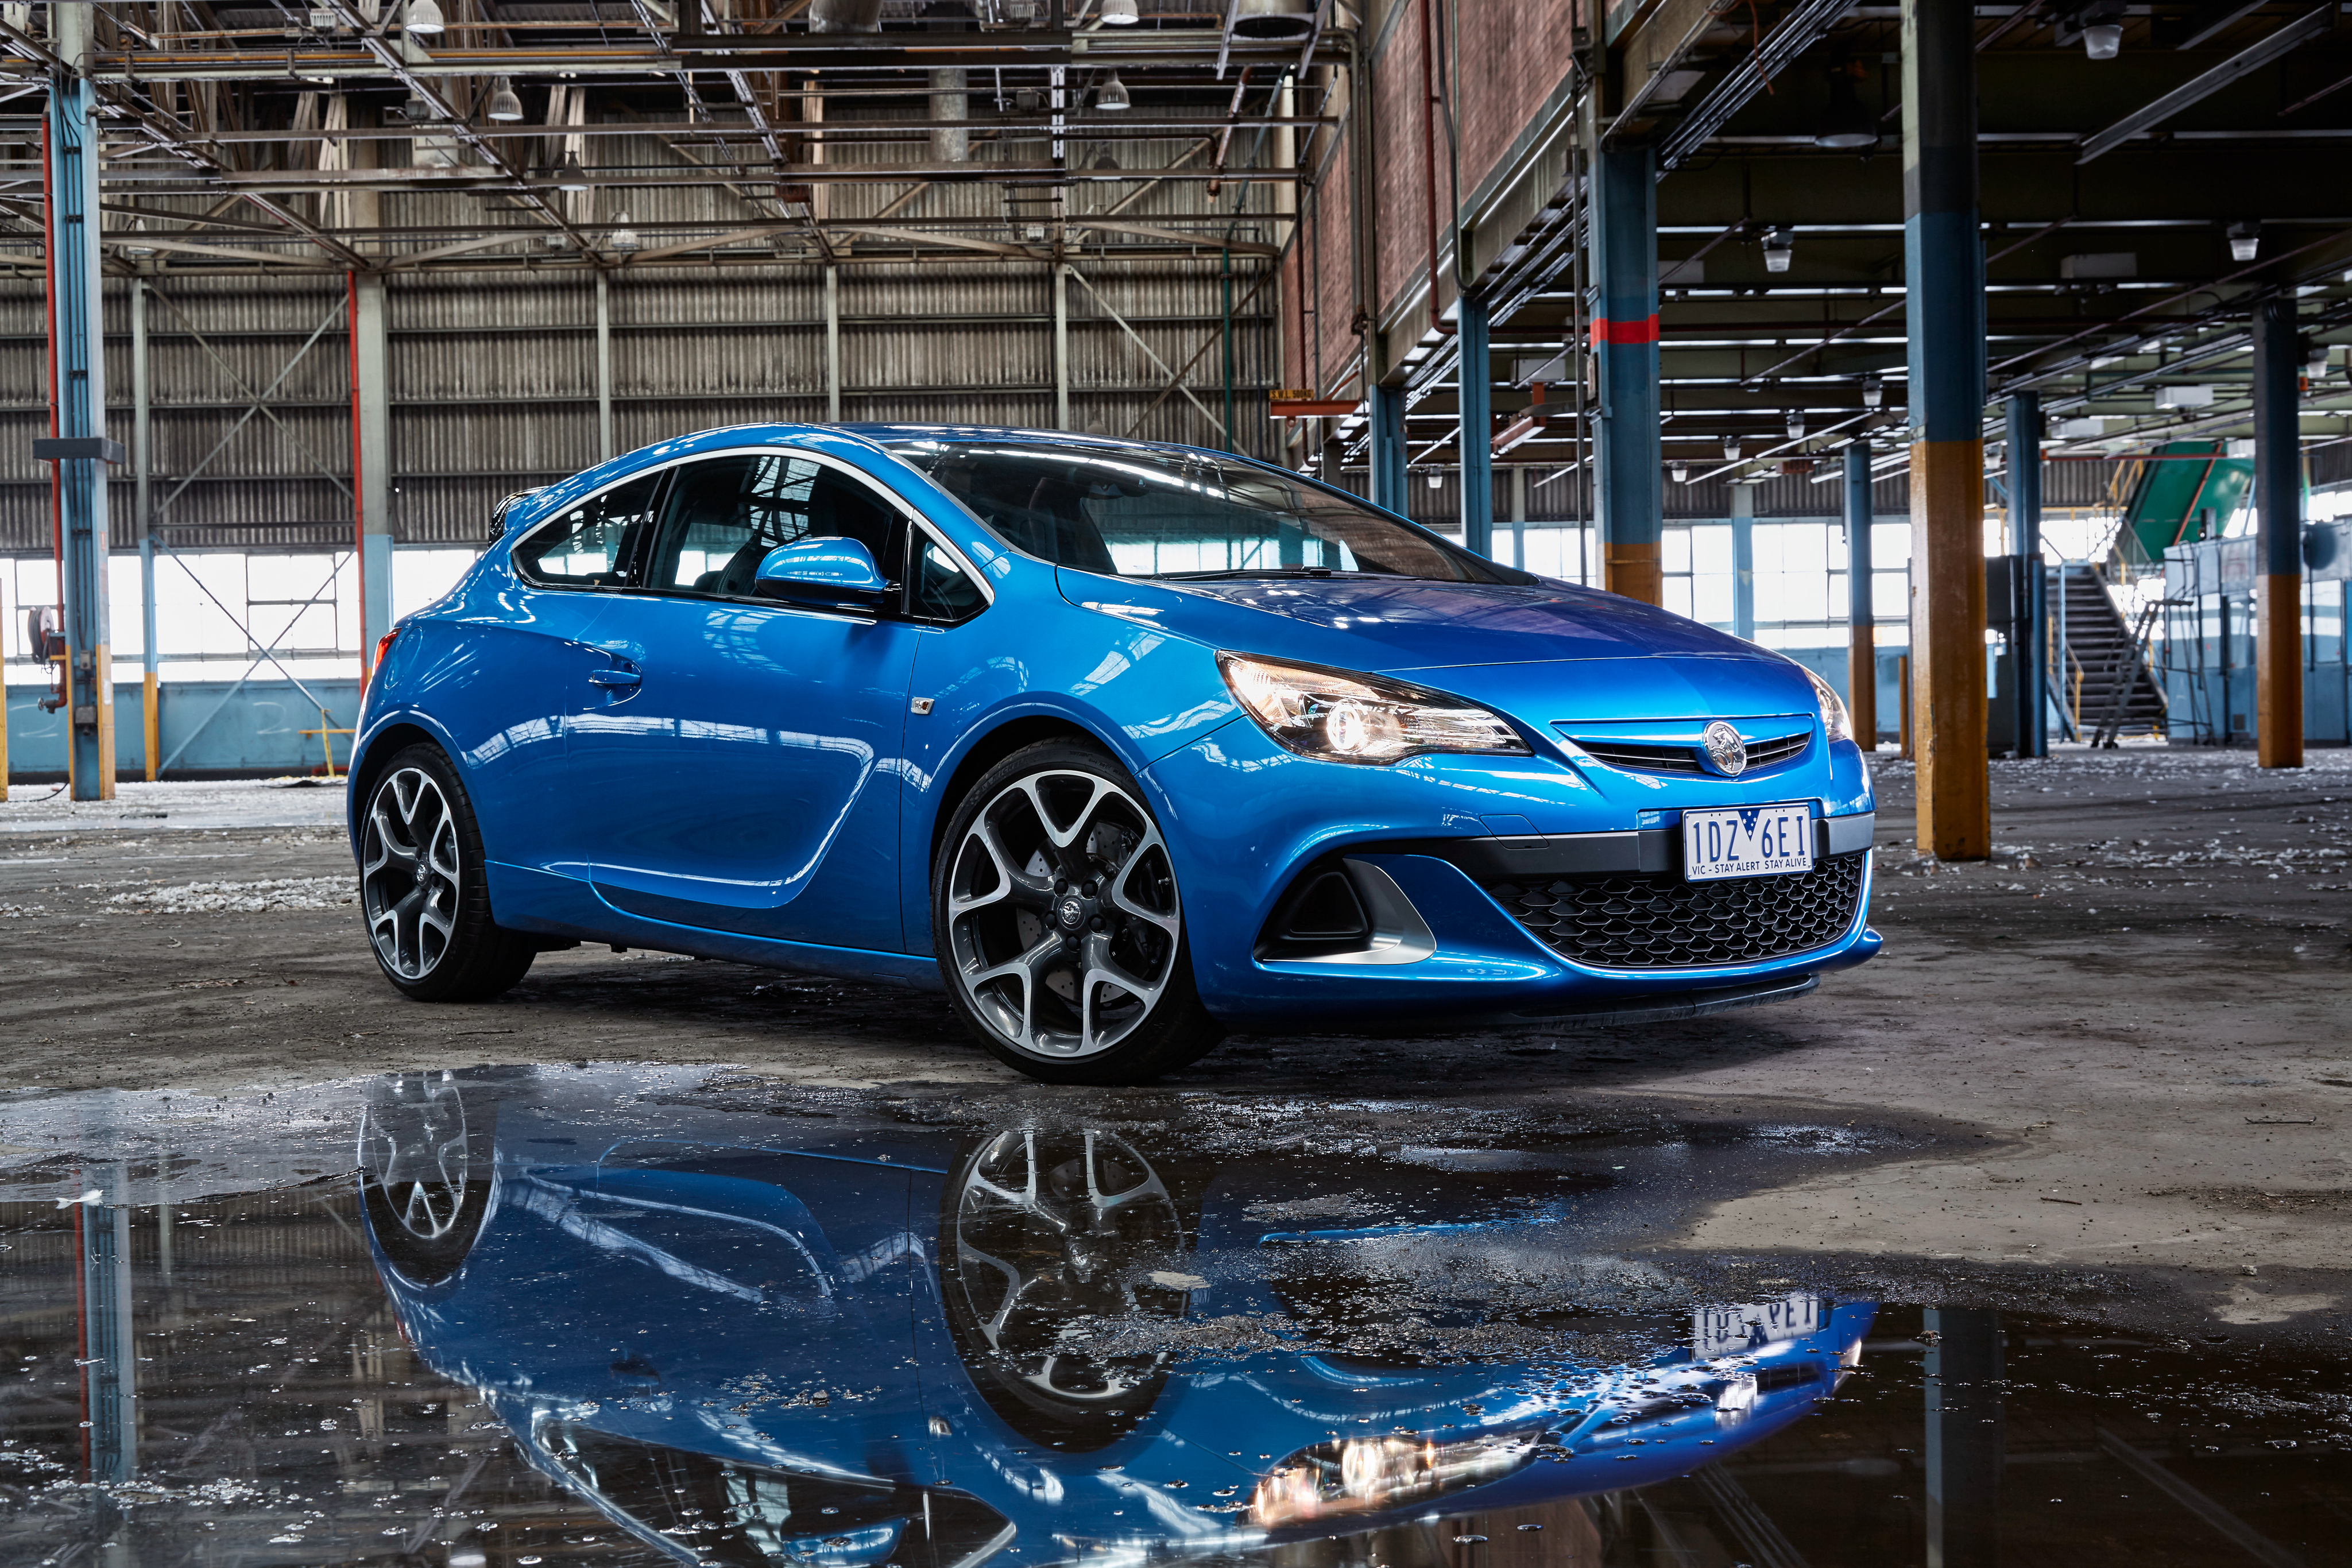 opel astra, vehicles, car, compact car, opel, reflection